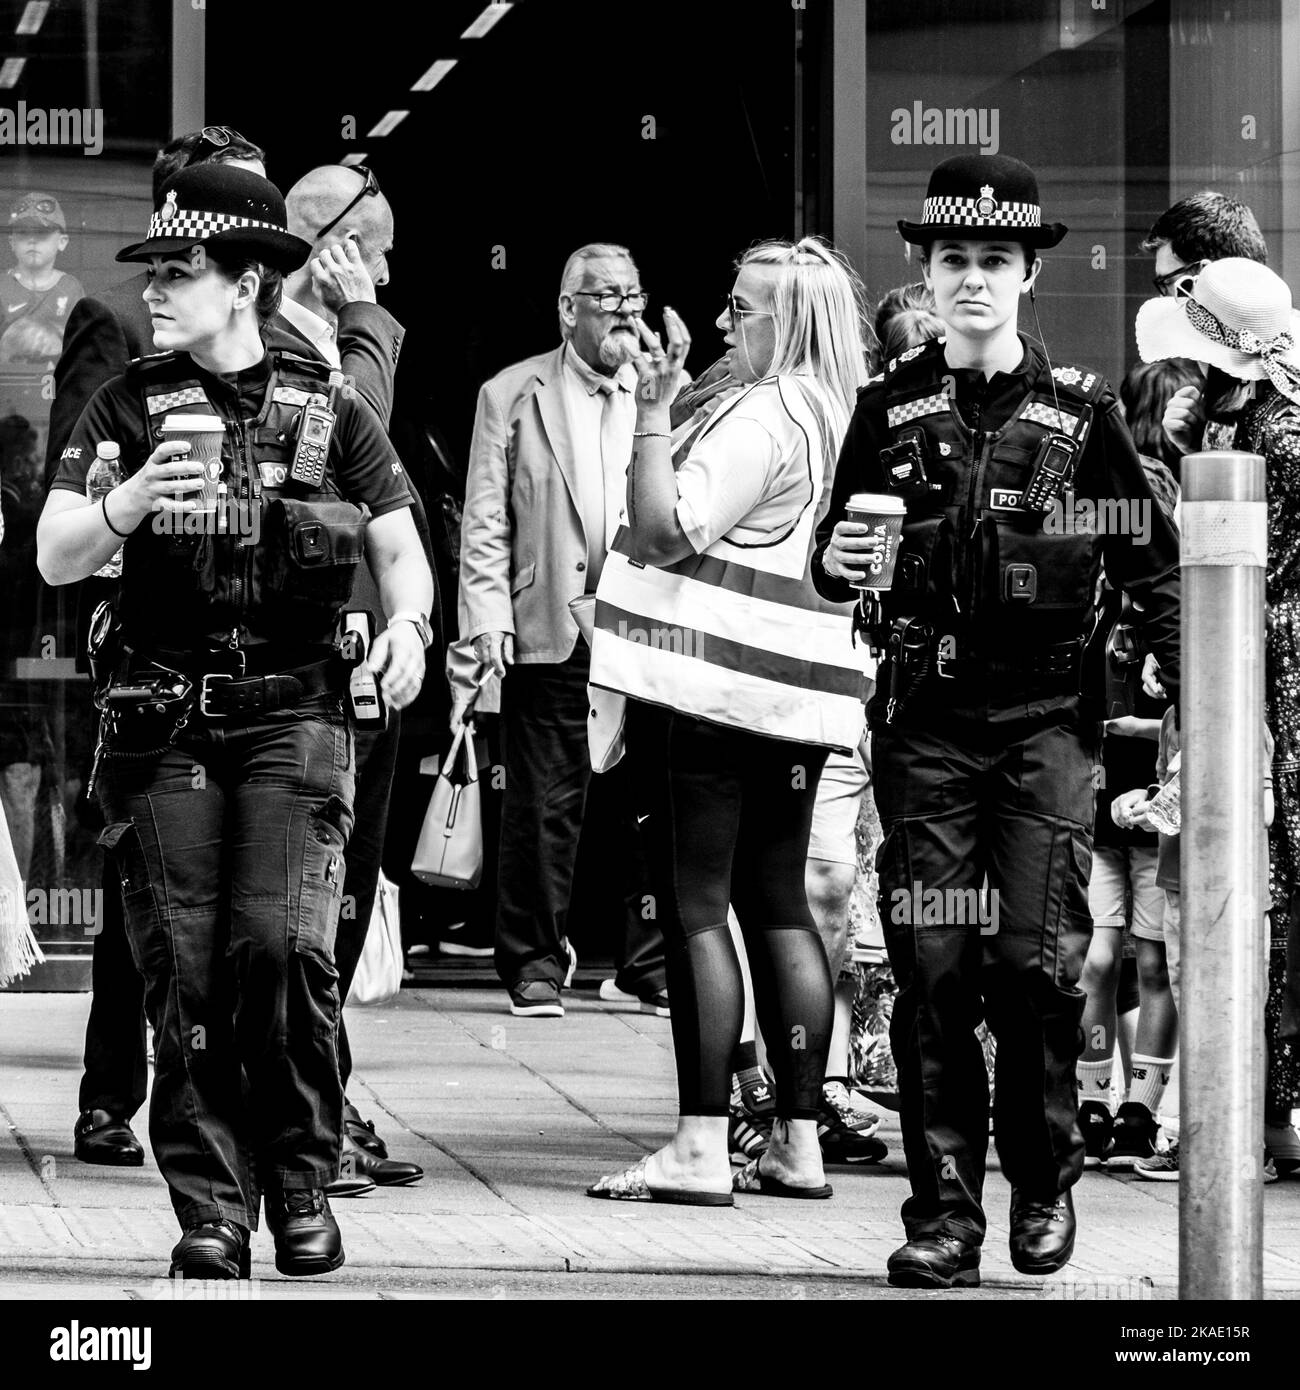 Epsom Surrey, London UK, June 03 2022, Two Women Police Officer Carrying Cups Of Takeaway Coffee On A Crowded Pavement Stock Photo